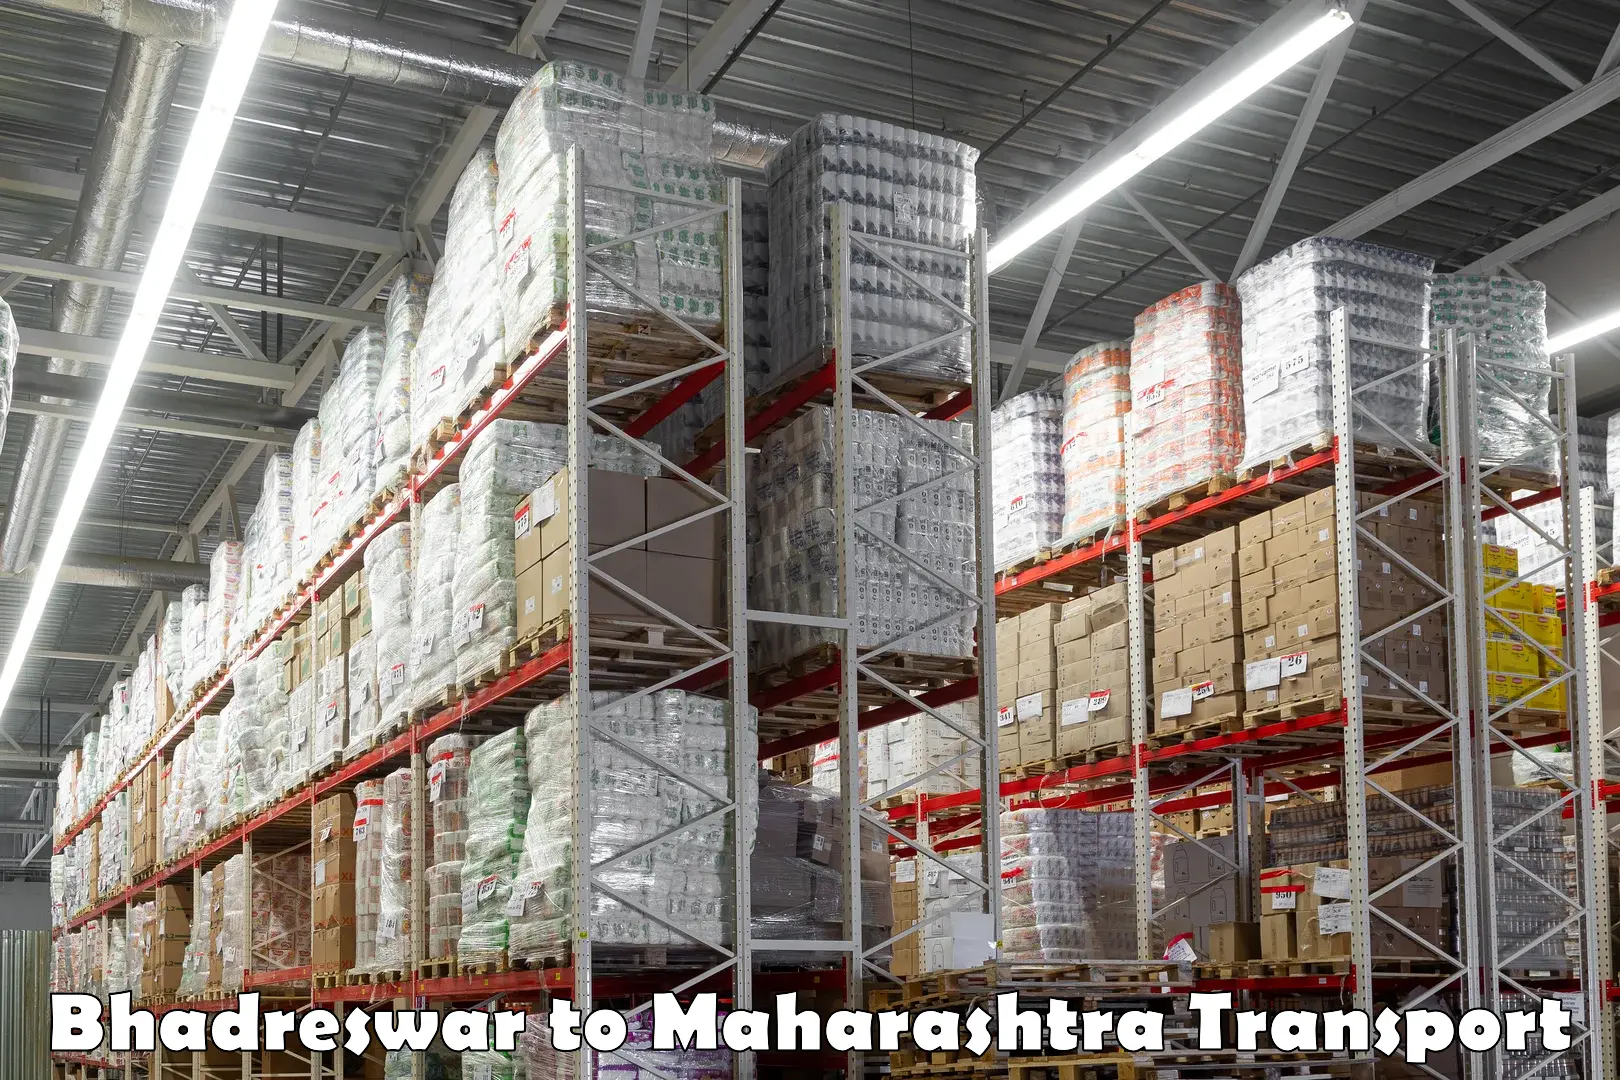 Air freight transport services Bhadreswar to Andheri